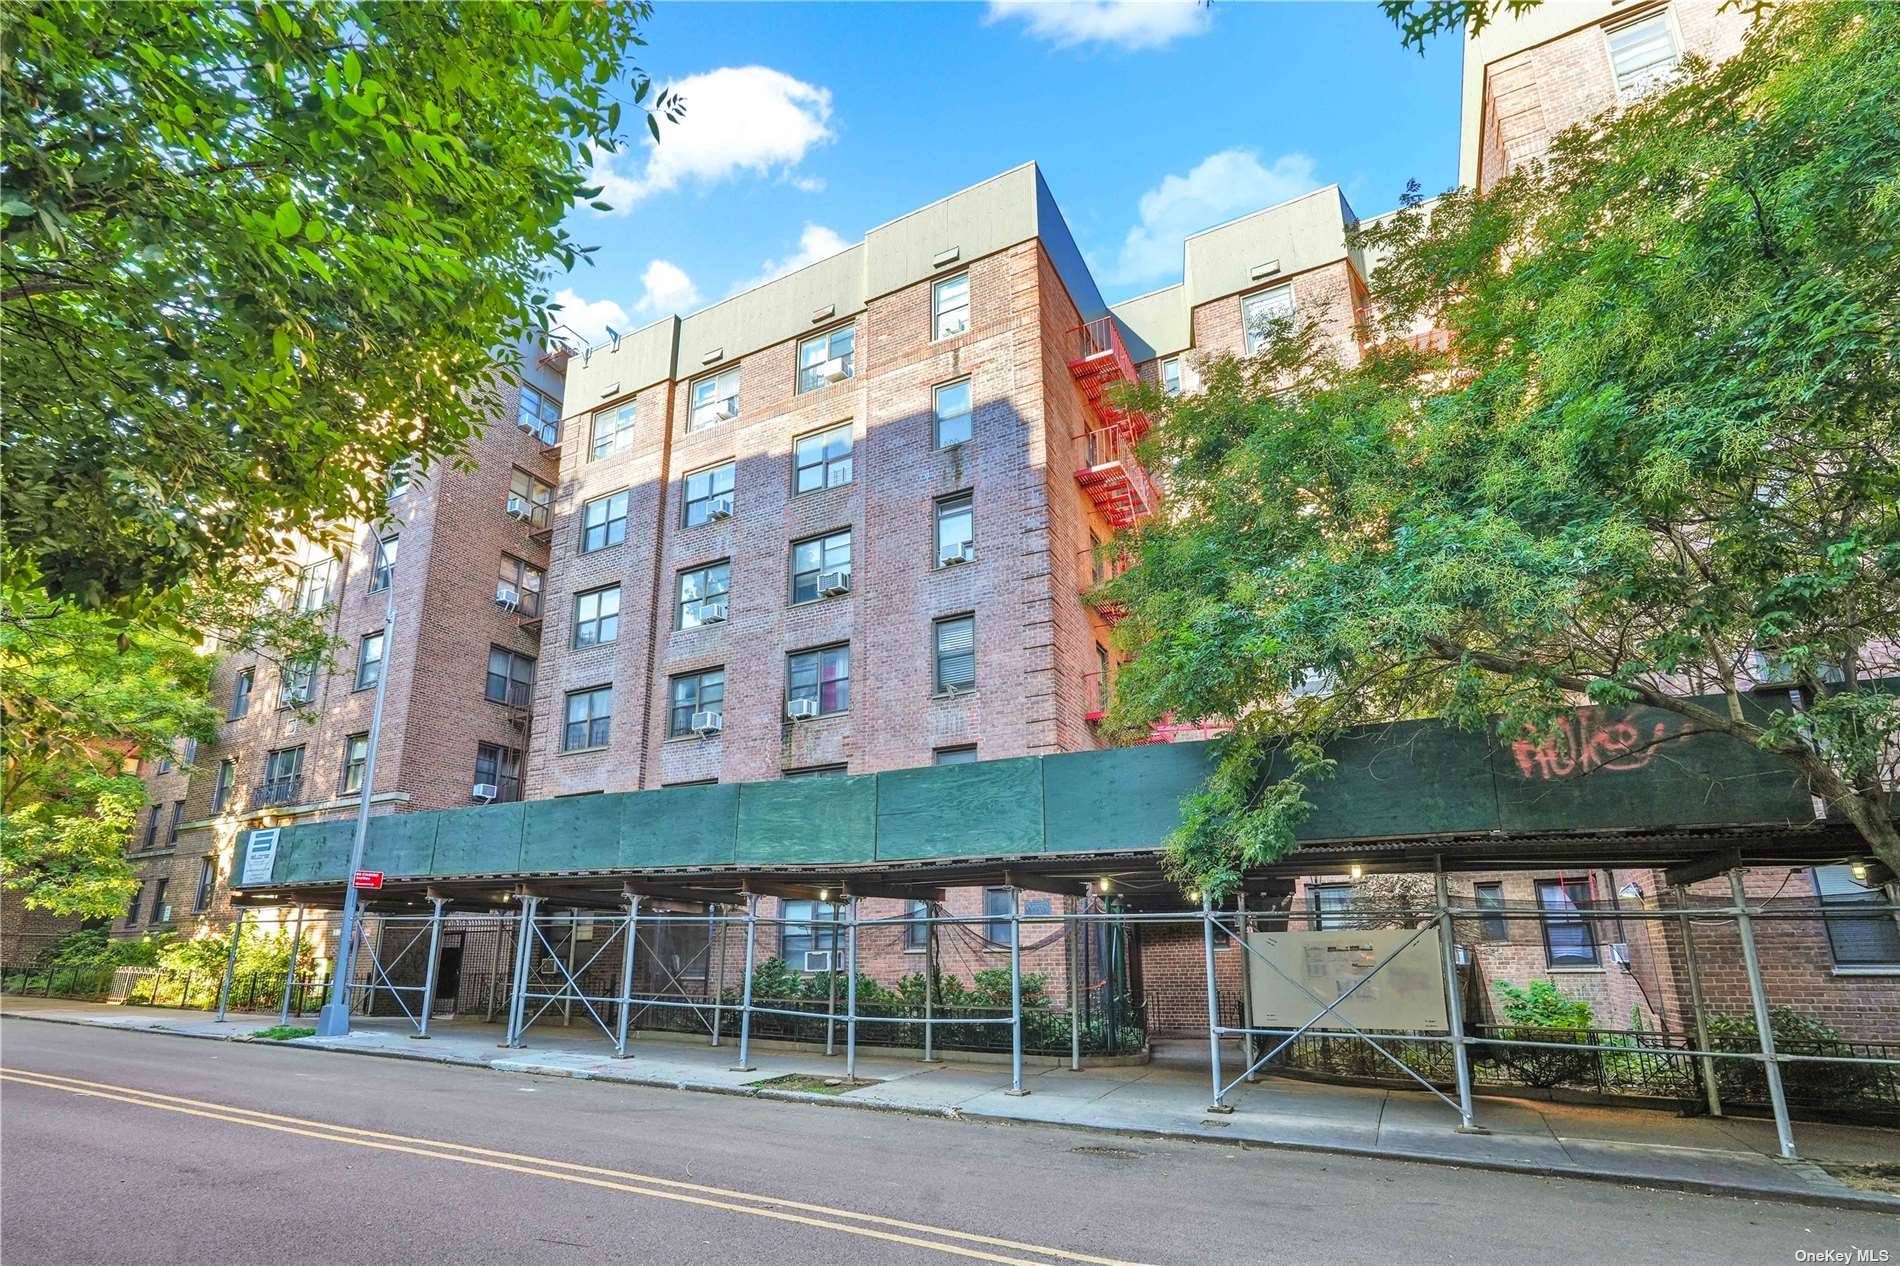 Welcome to your new home in the vibrant and diverse neighborhood of Jackson Heights, Queens.